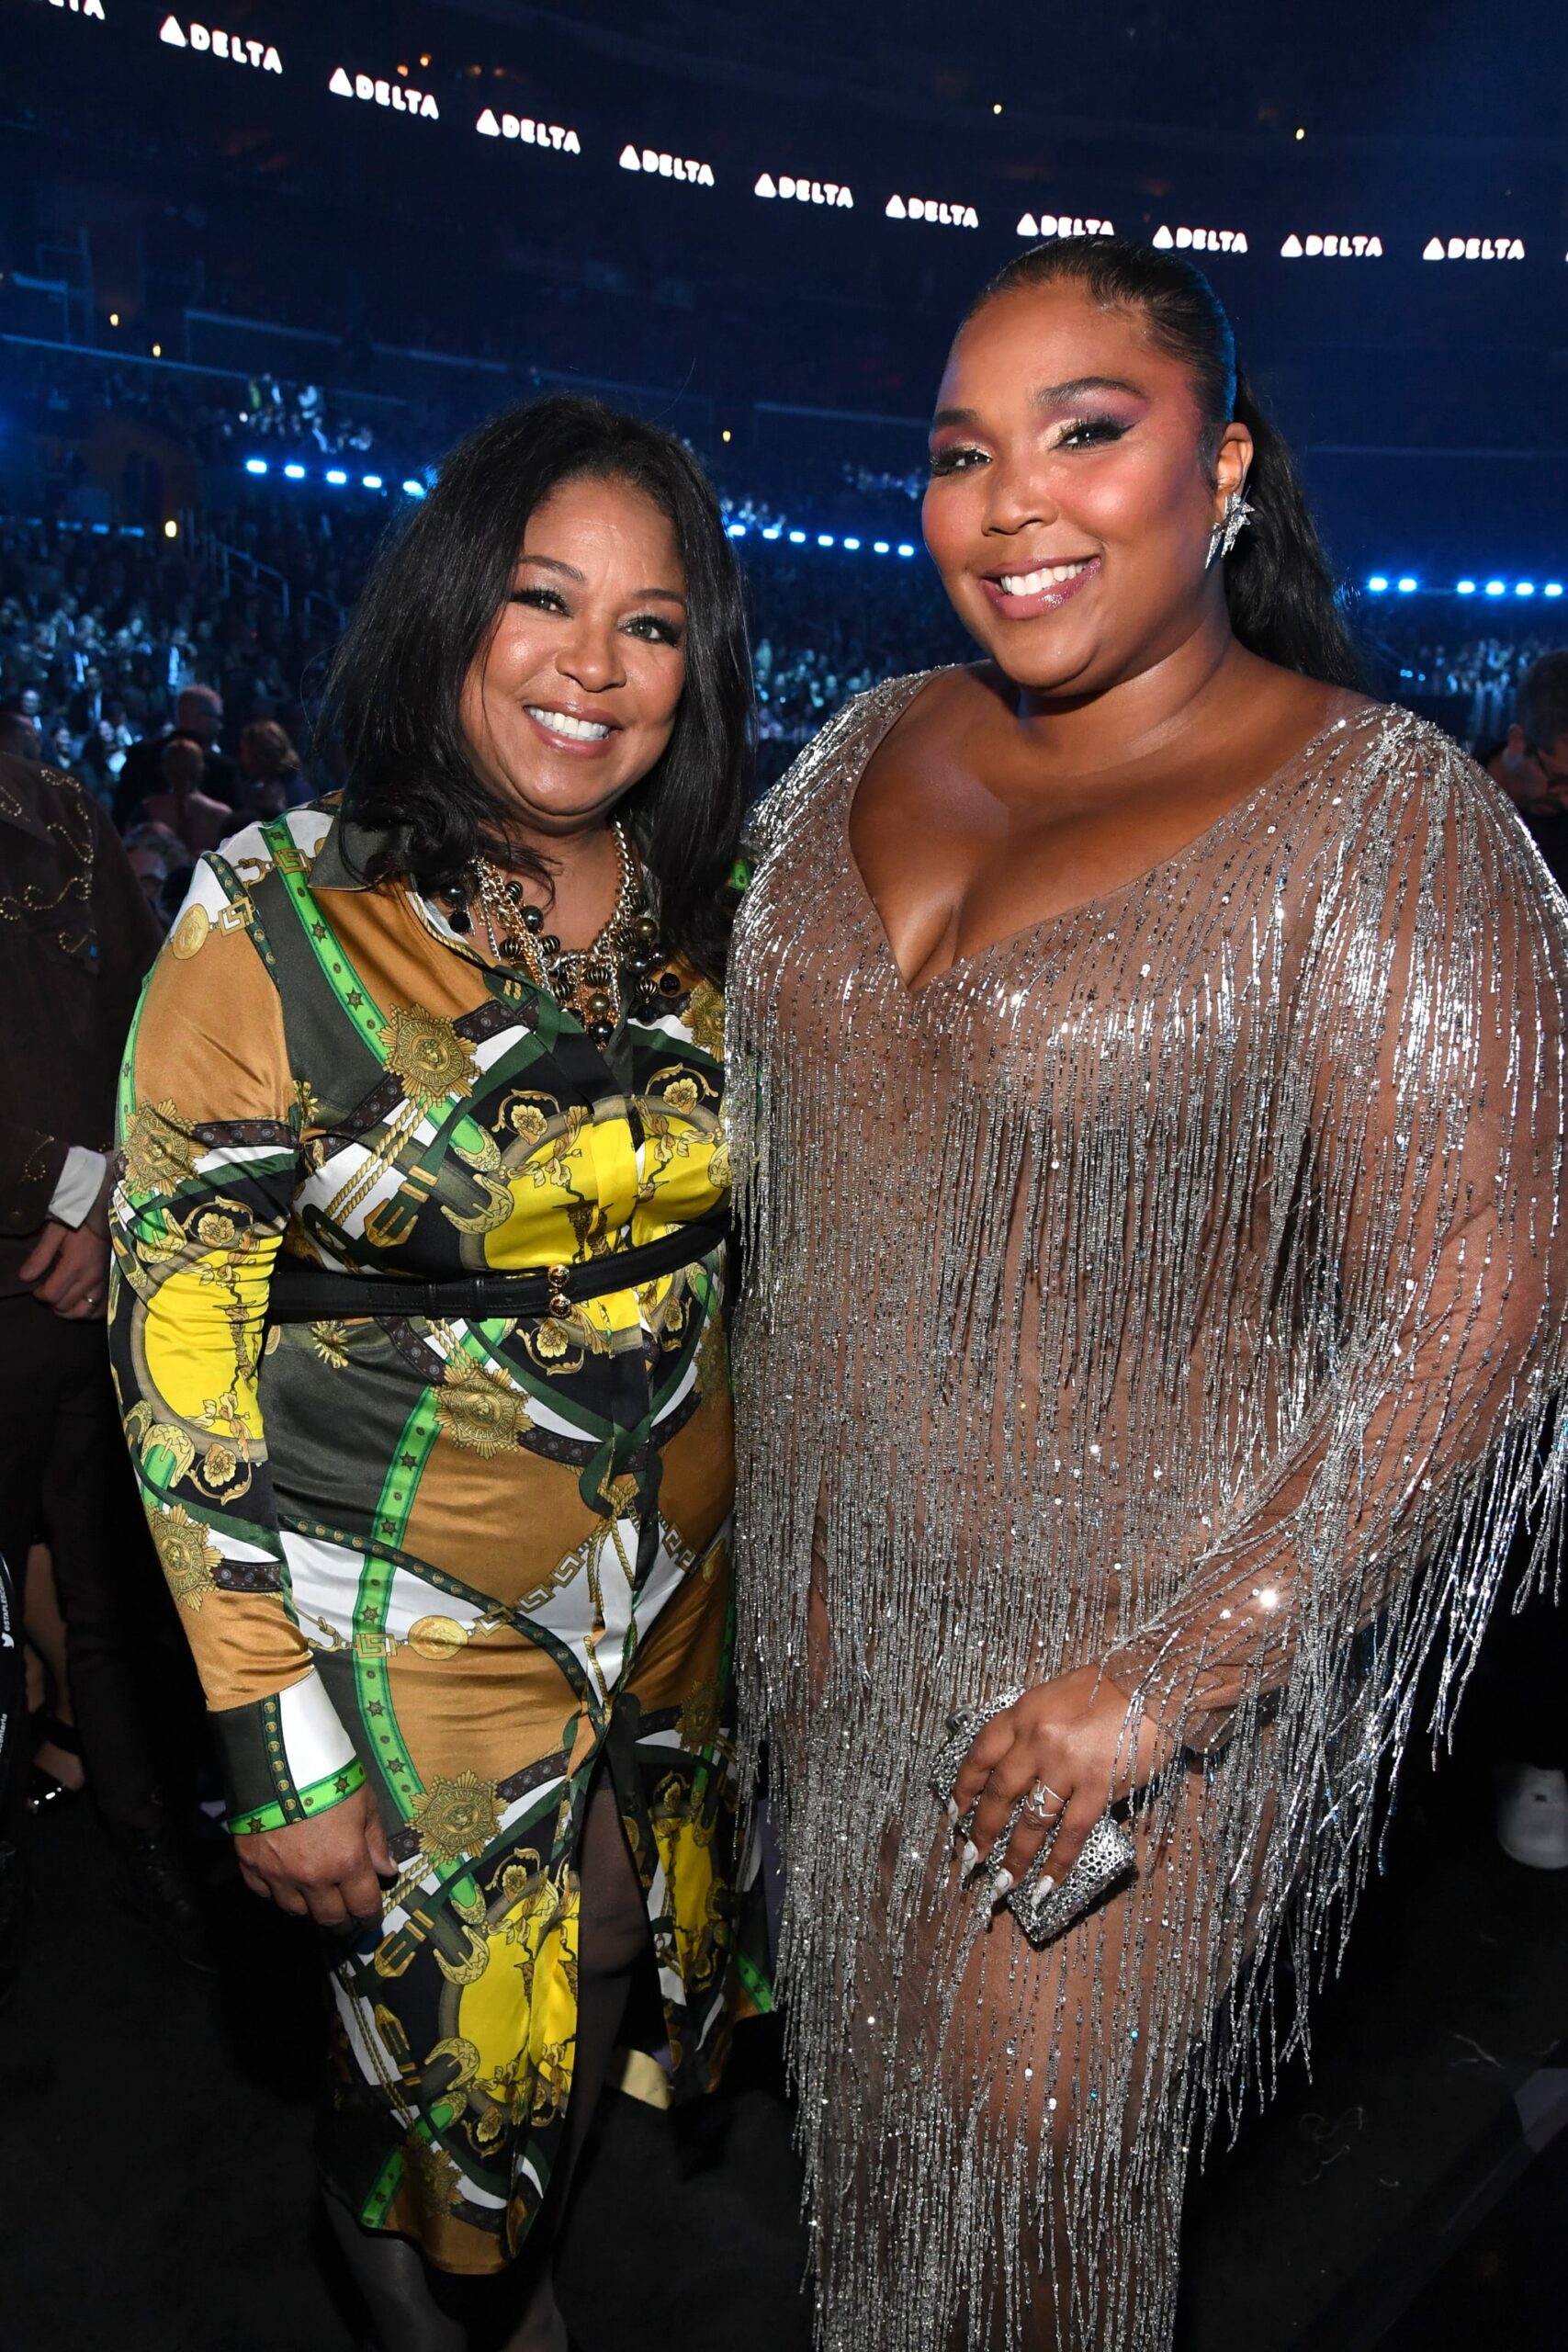 LOS ANGELES, CALIFORNIA - JANUARY 26: LIzzo (R) and Shari Johnson-Jefferson during the 62nd Annual GRAMMY Awards at STAPLES Center on January 26, 2020 in Los Angeles, California. (Photo by Kevin Mazur/Getty Images for The Recording Academy)